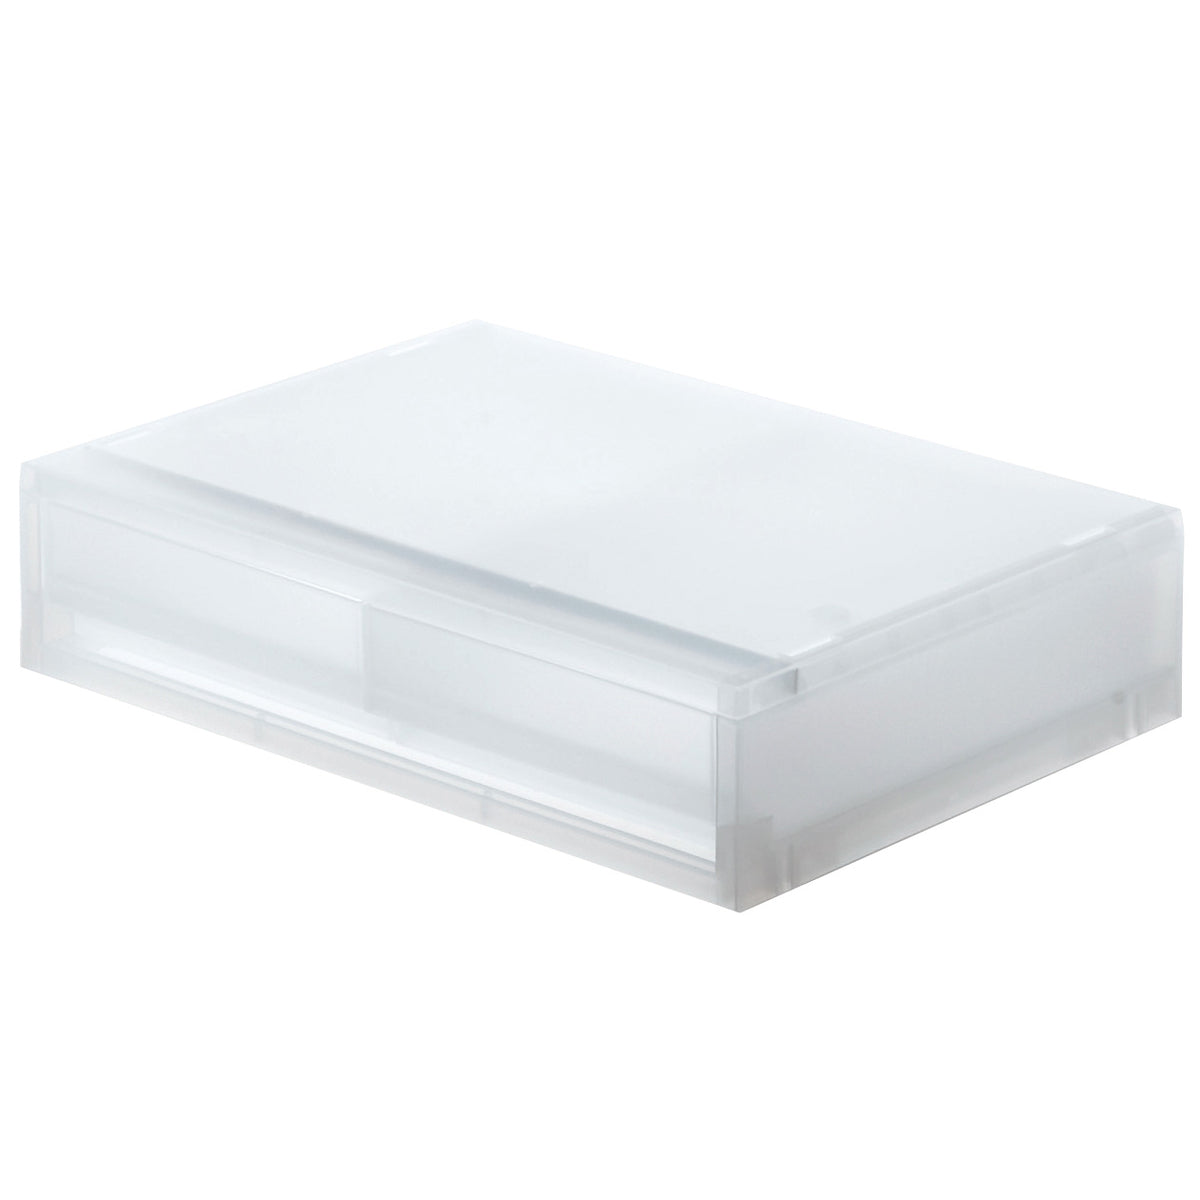 Shopping made easy and fun Polypropylene Case 2 Drawer Shallow, two drawer  plastic storage 